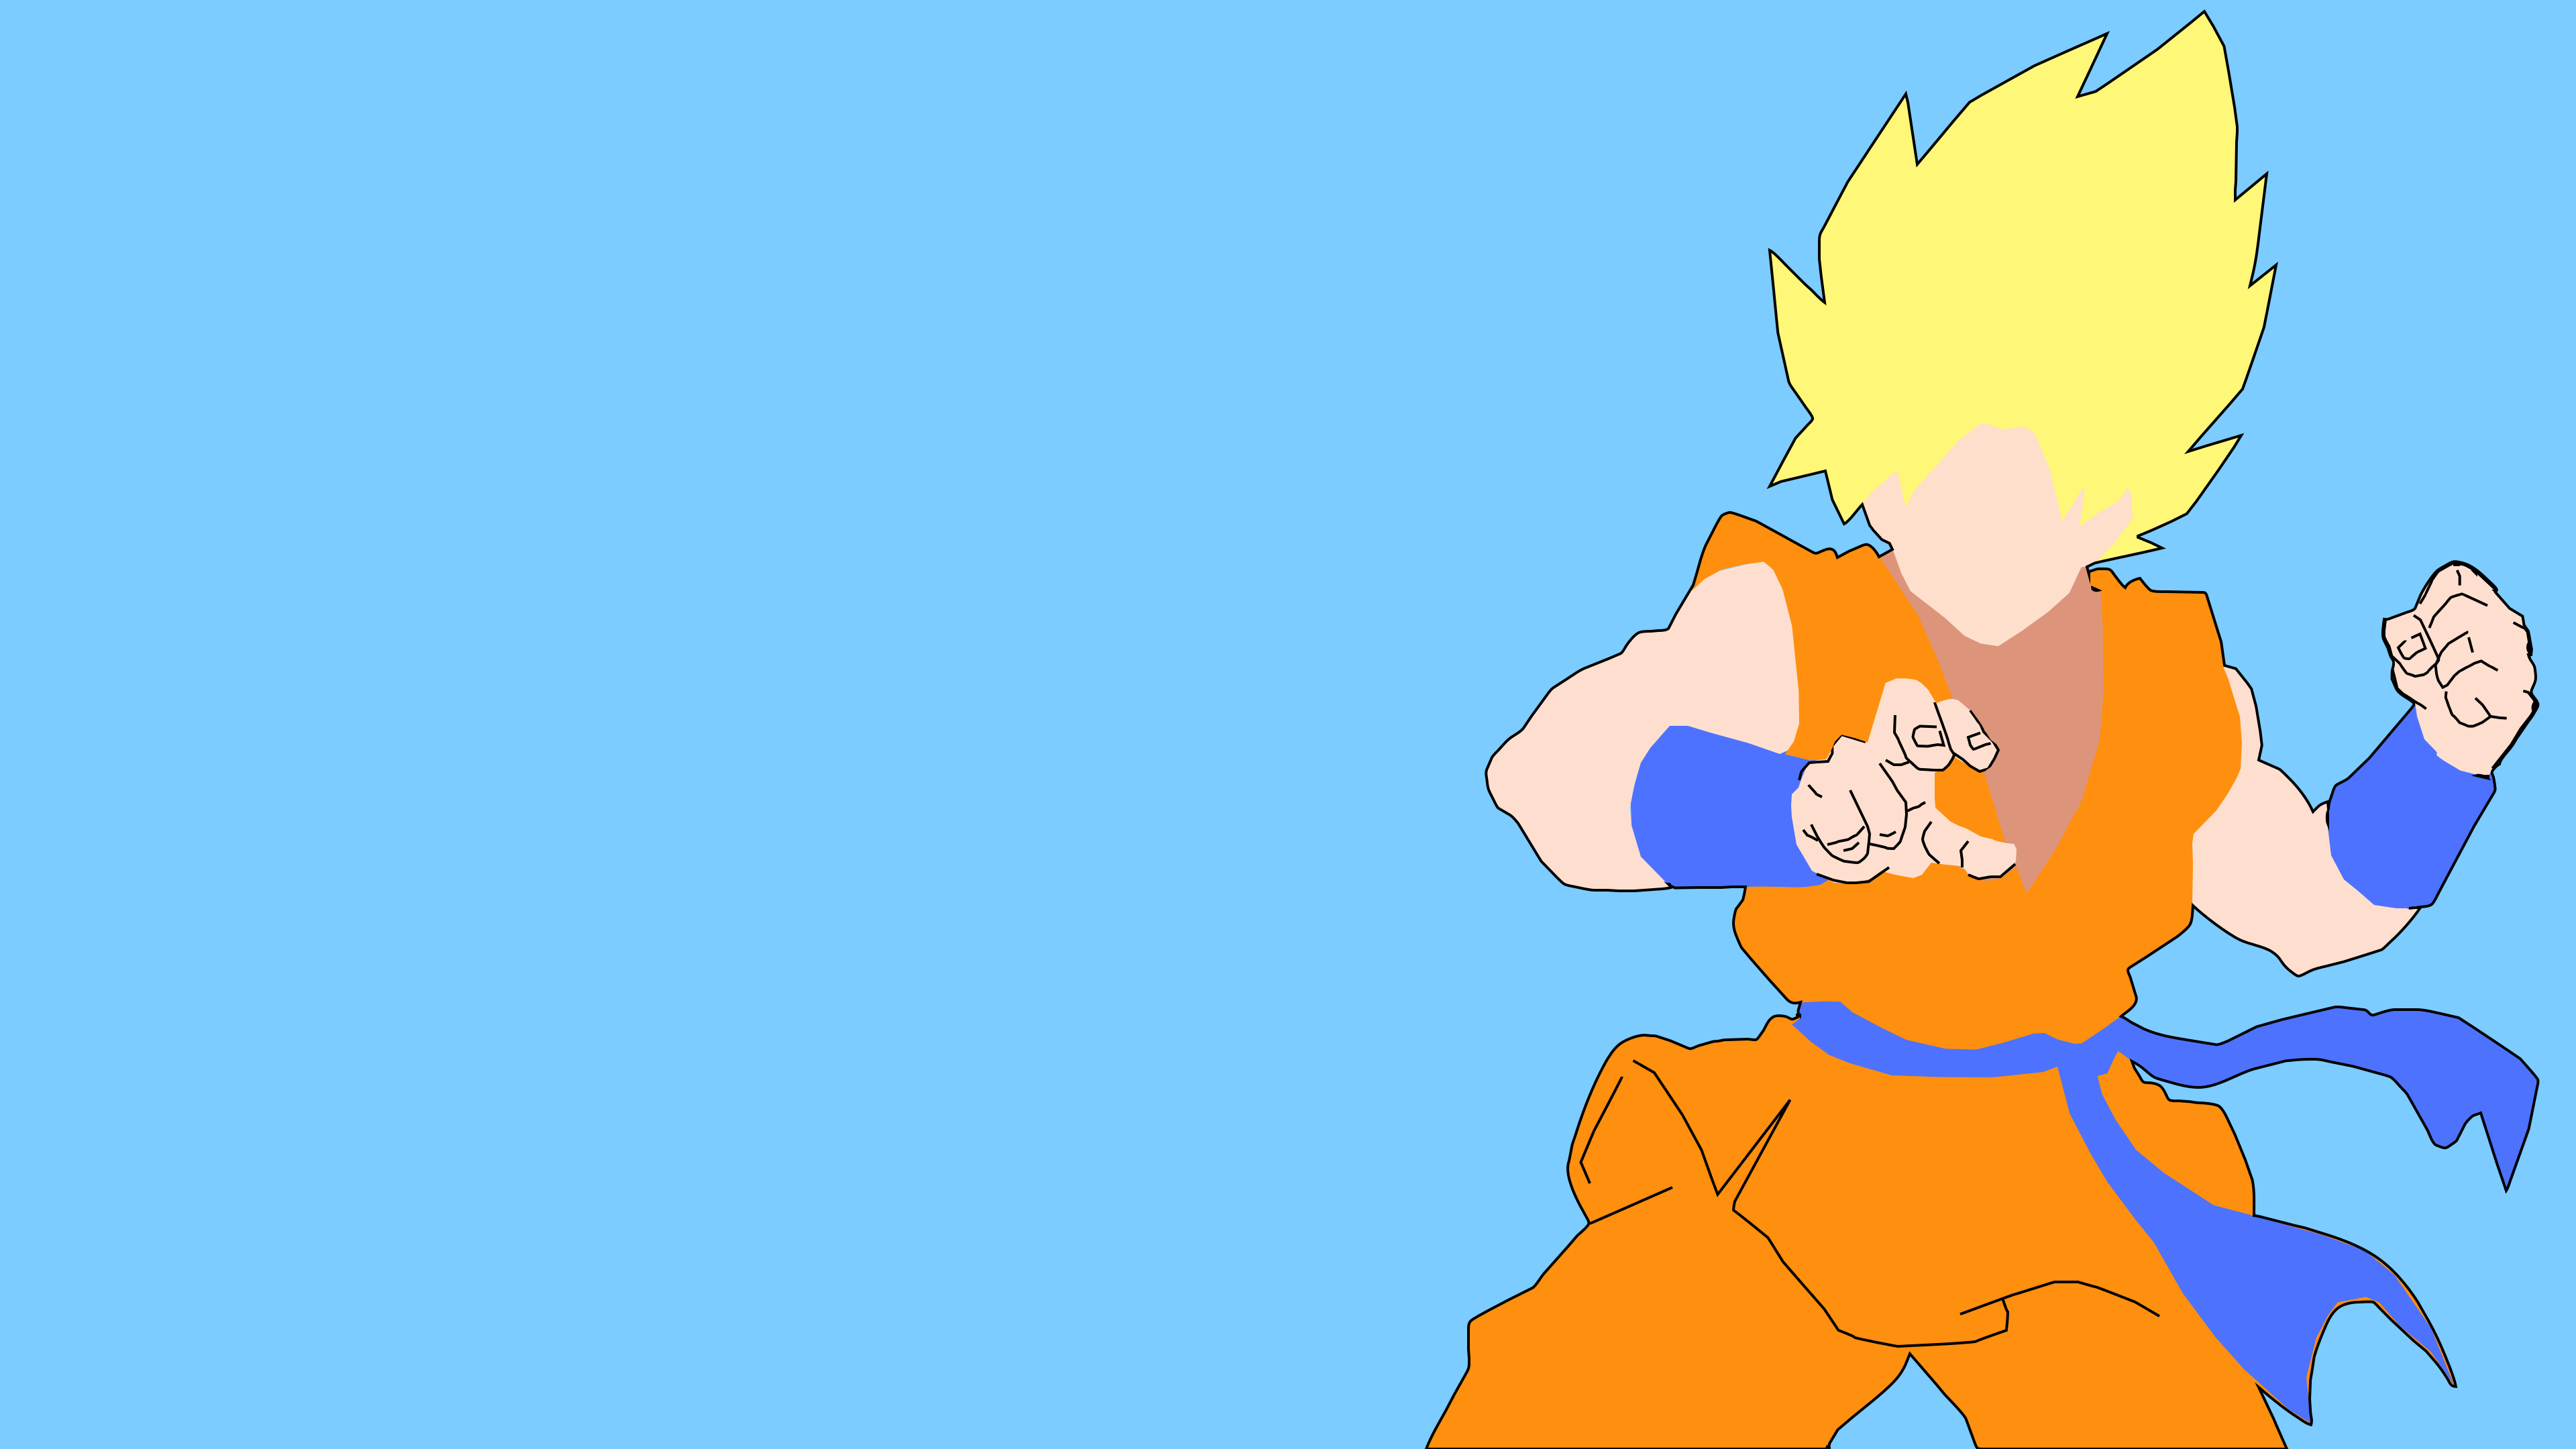 My minimalist Goku wallpaper, high quality version available in the comments